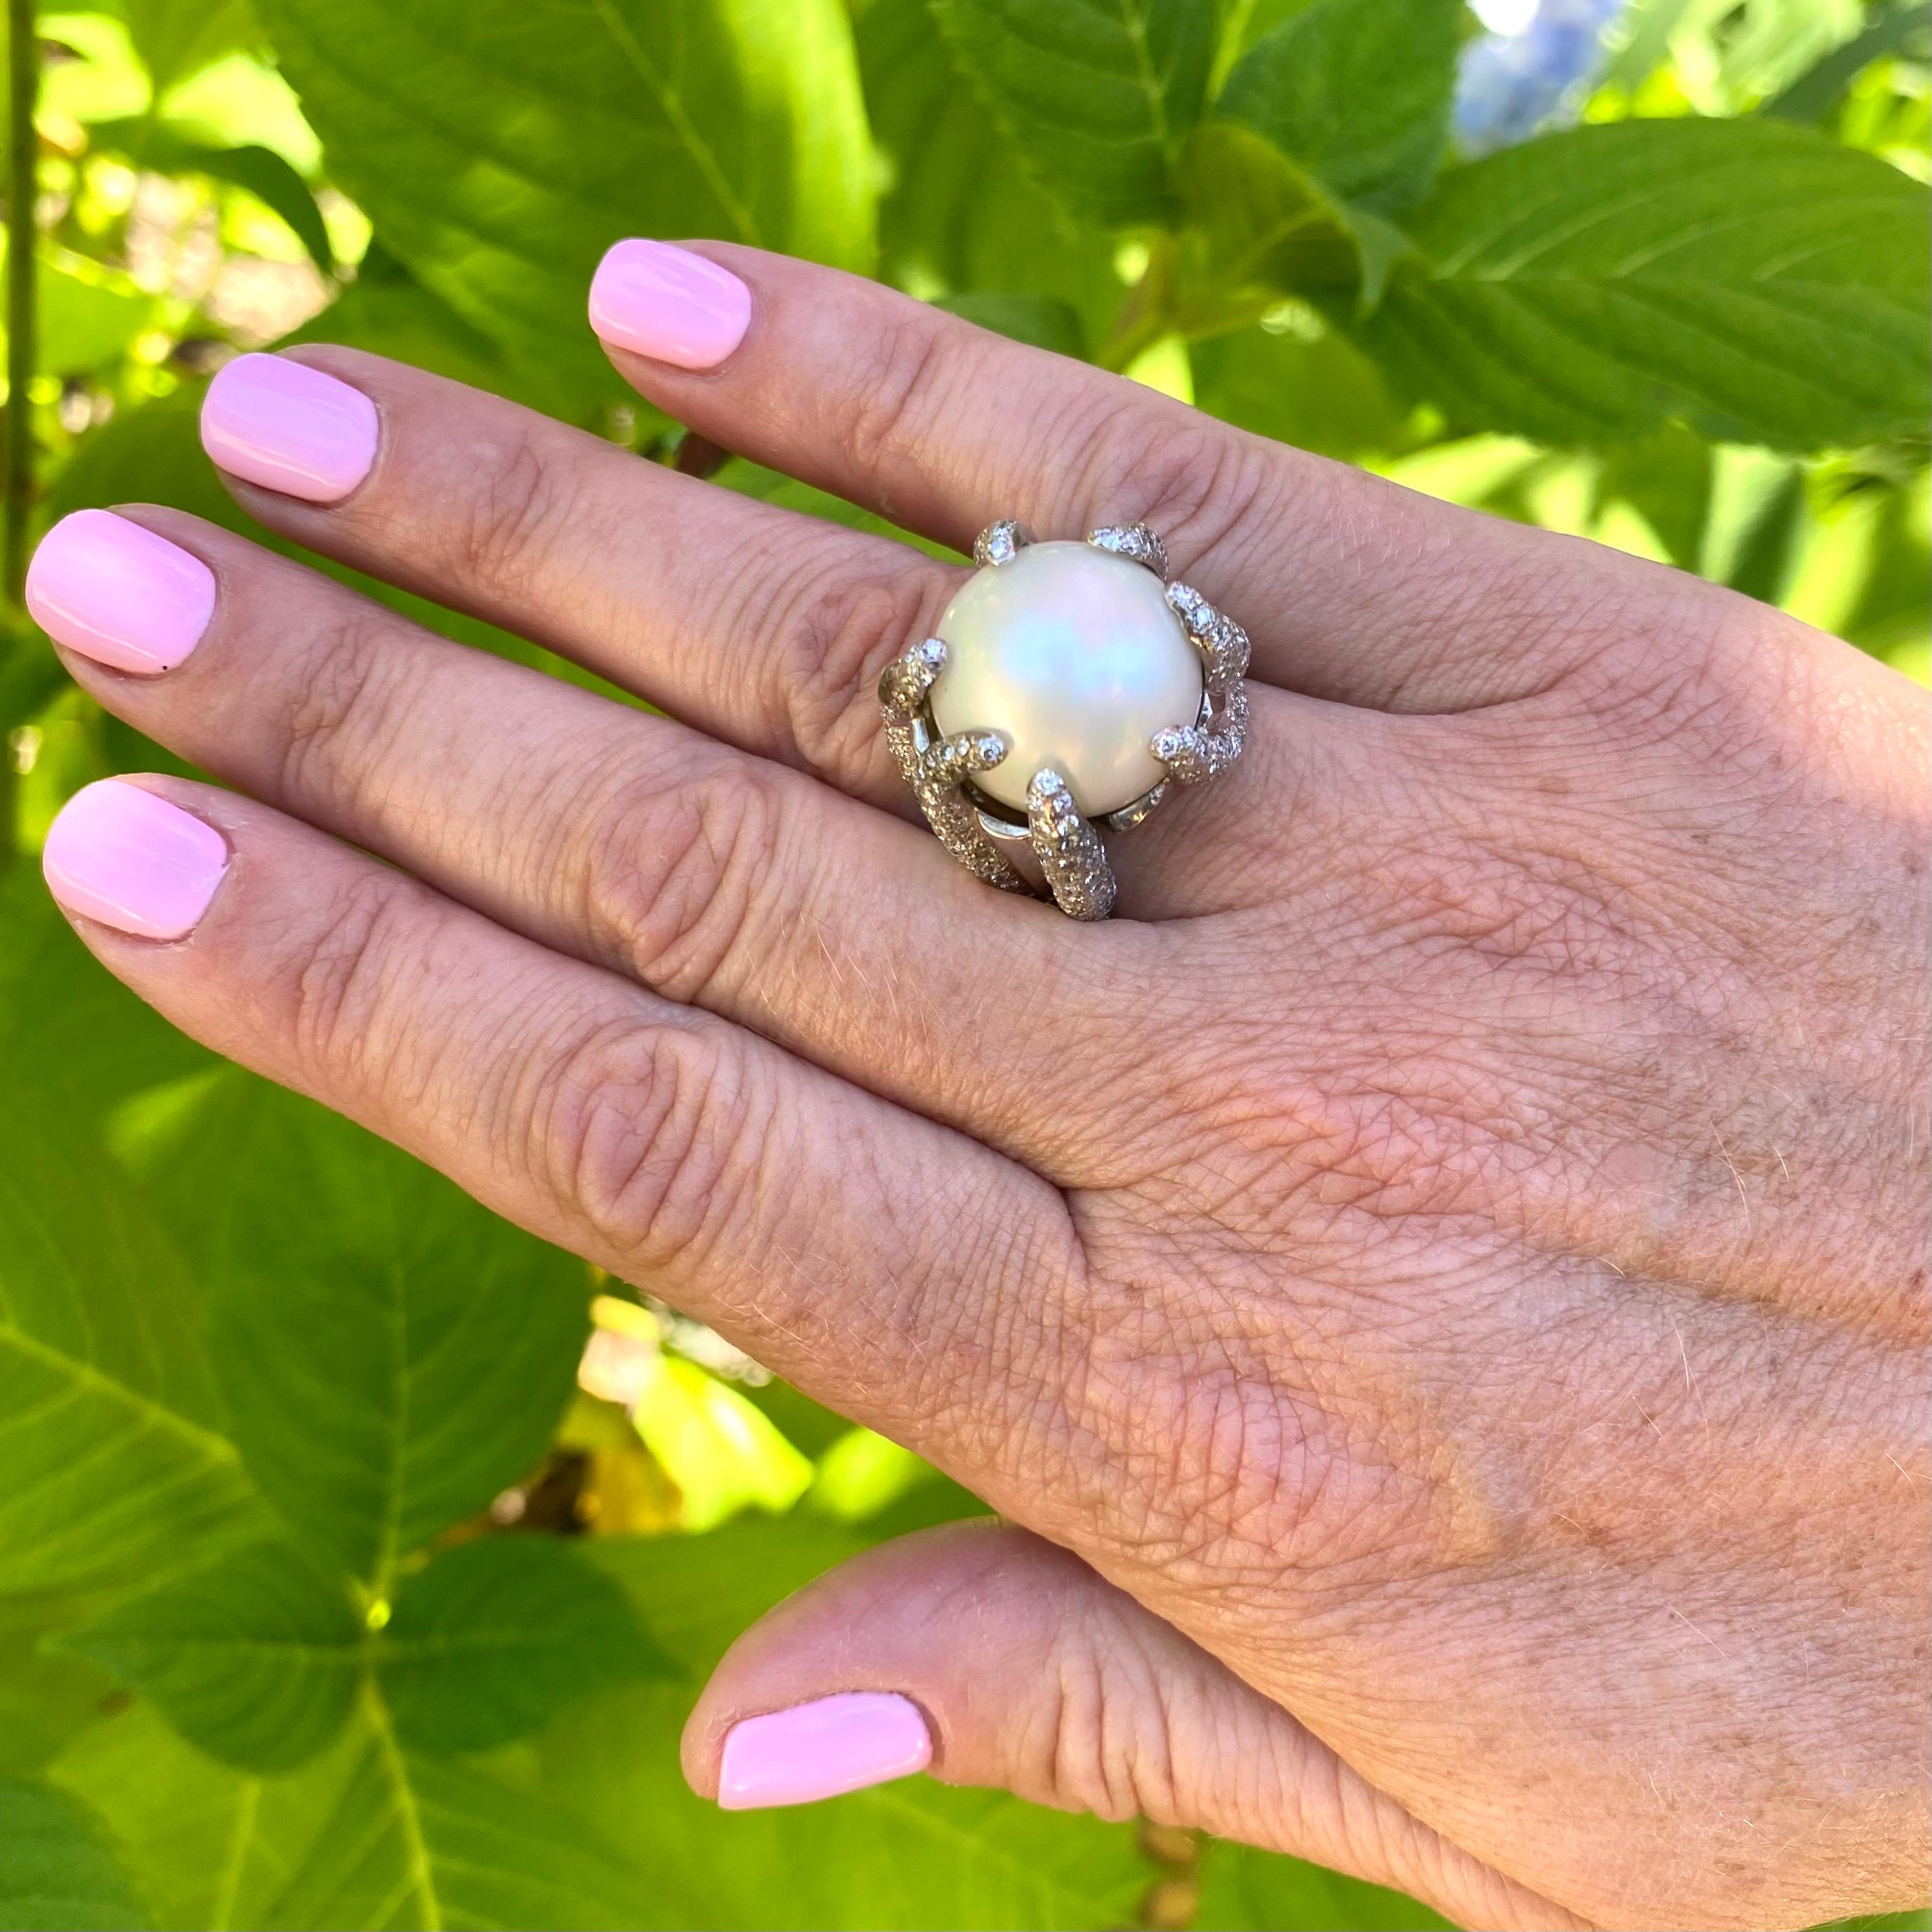 Stunning cocktail ring in 18k white gold & yellow gold features a round 16.8mm south sea pearl artfully designed with claws of brilliant pavé diamonds totaling 3.65 carats.  The height of the ring is 0.75